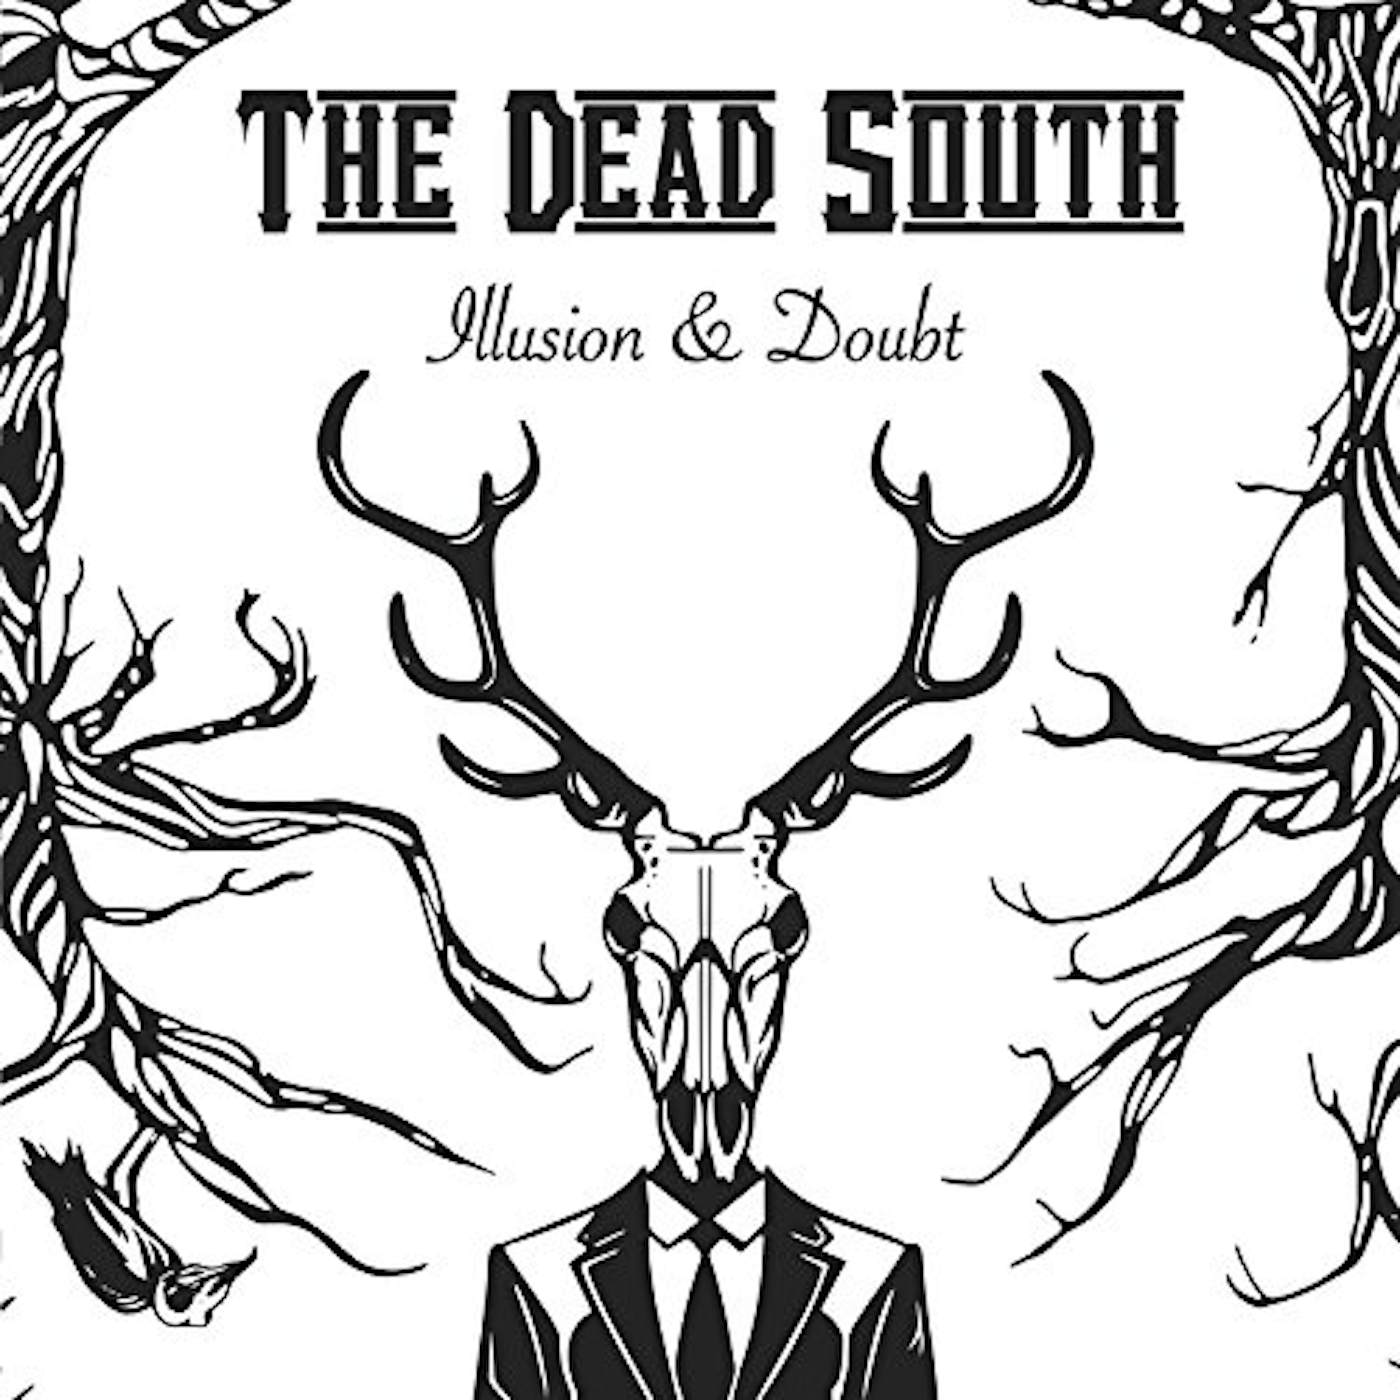 The Dead South ILLUSION & DOUBT CD